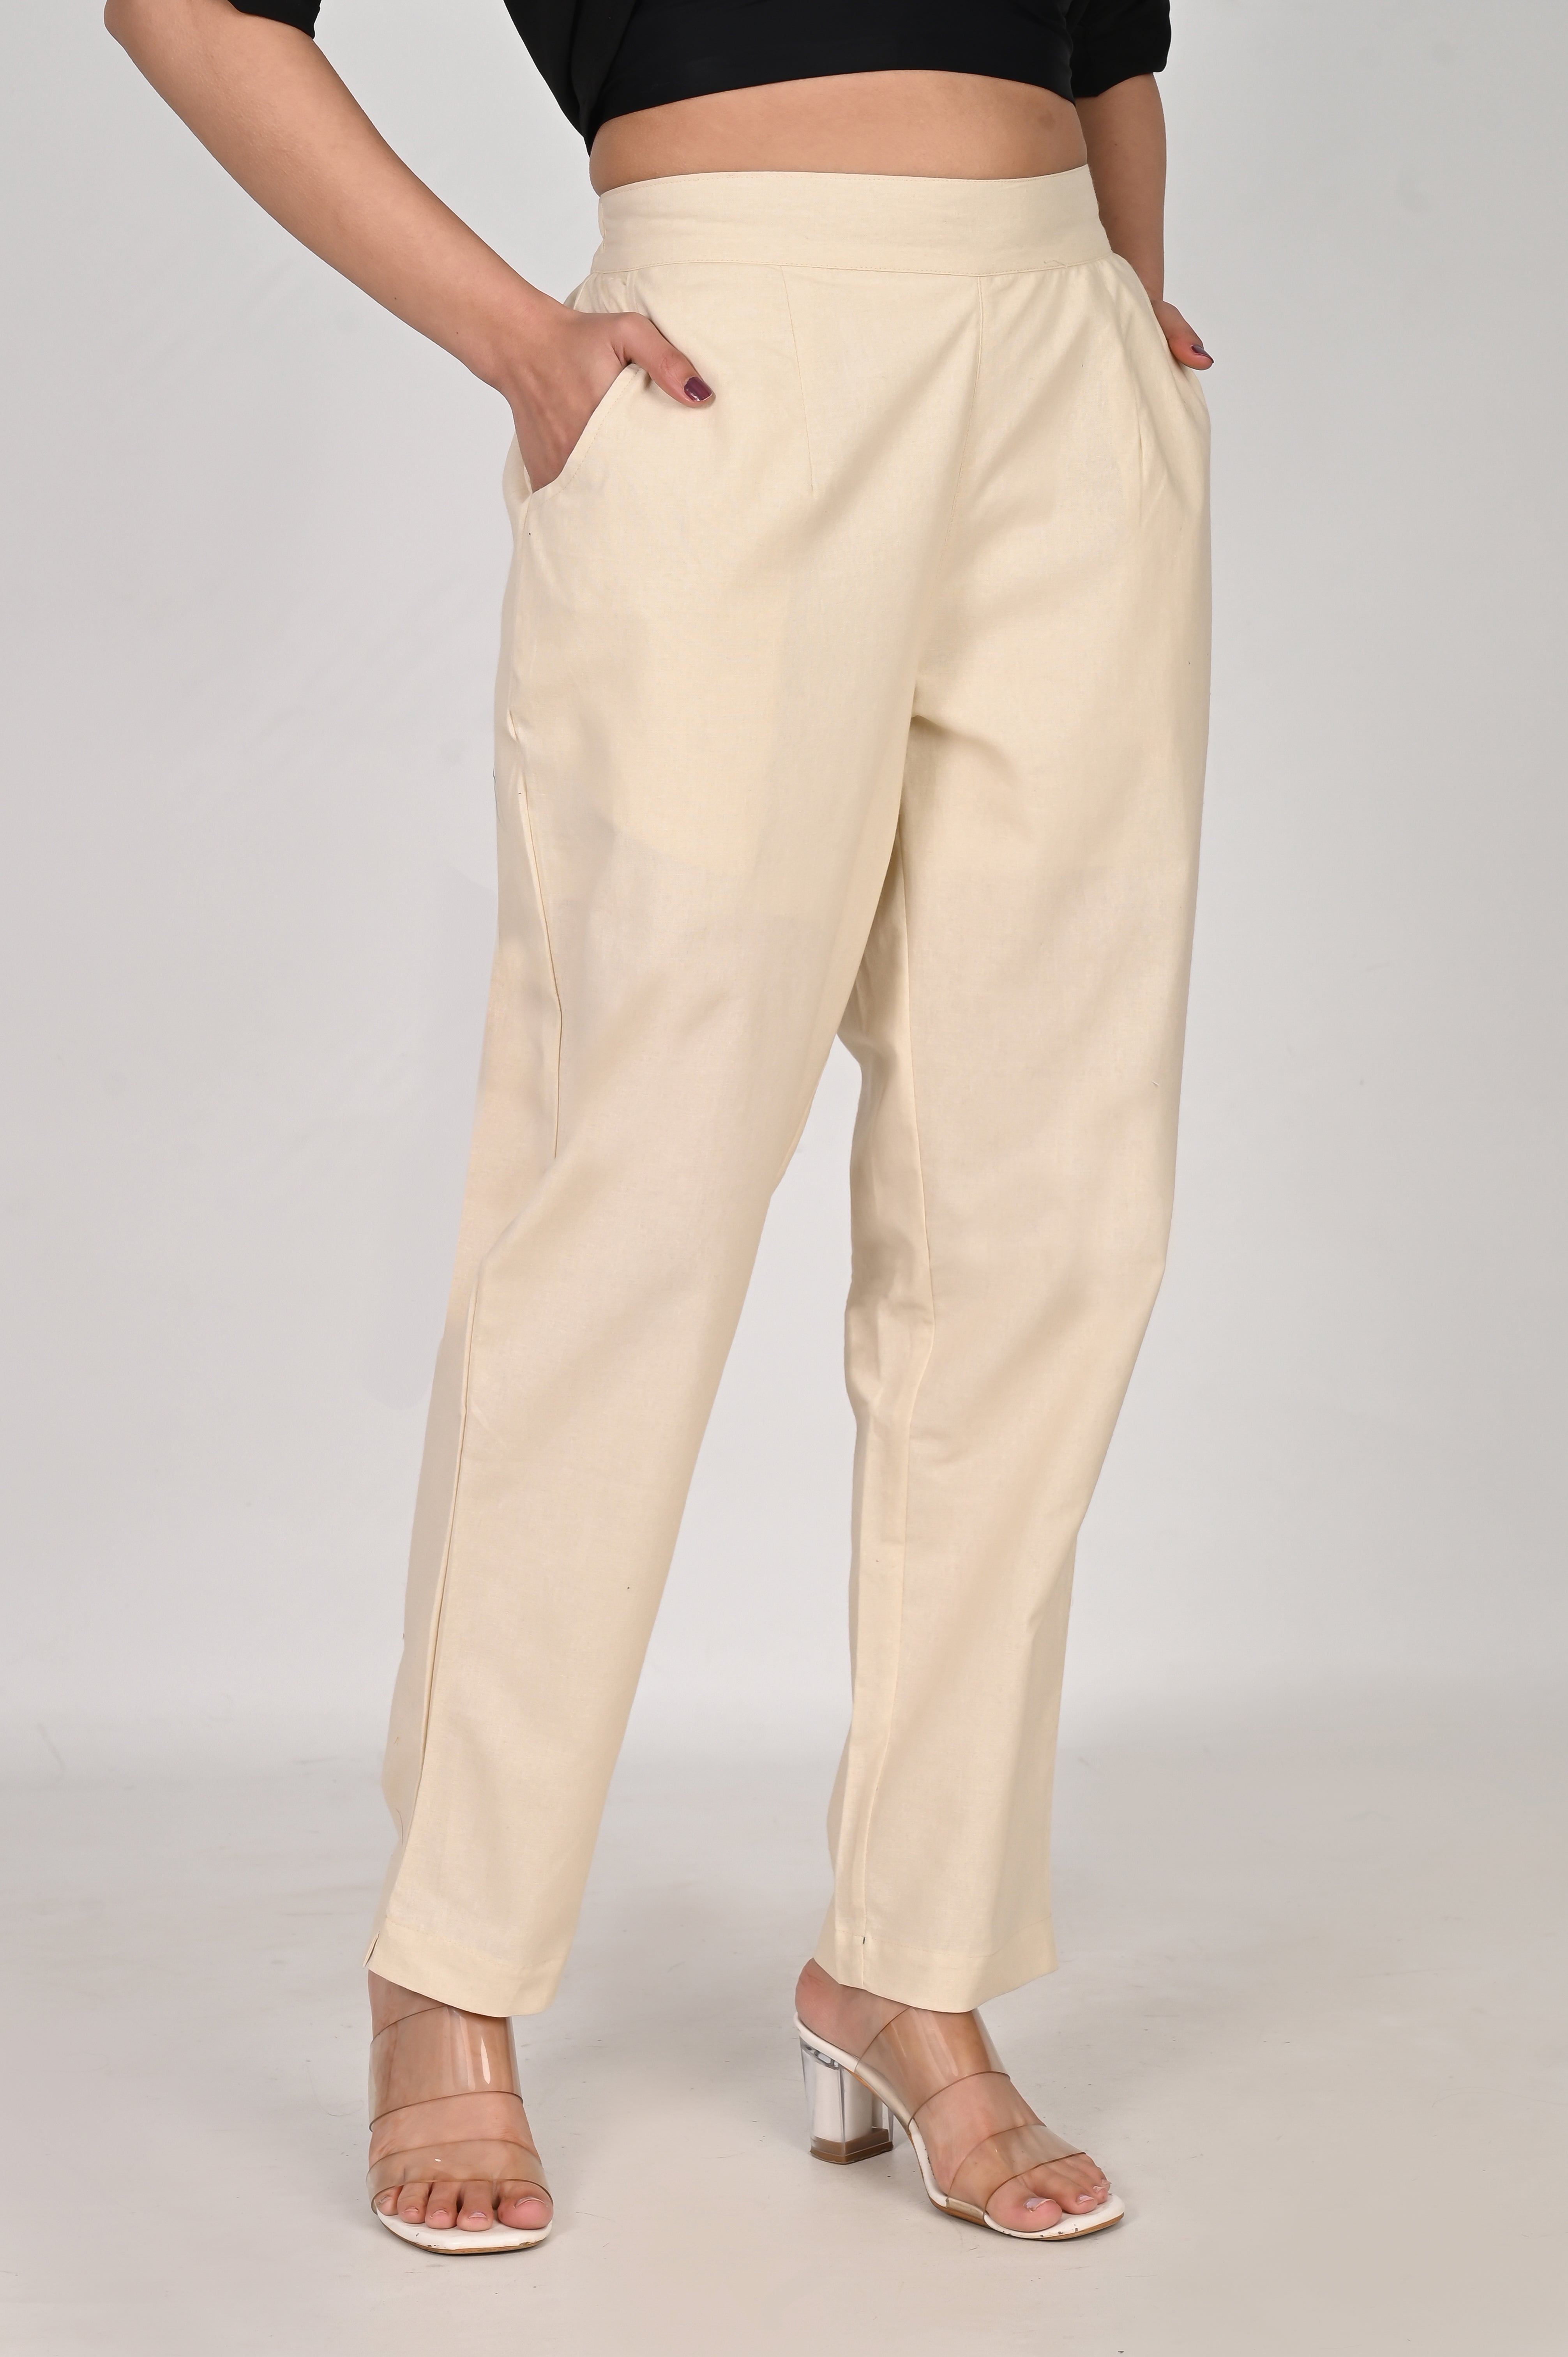 Mango Belted Paperbag Trousers in Natural | Lyst